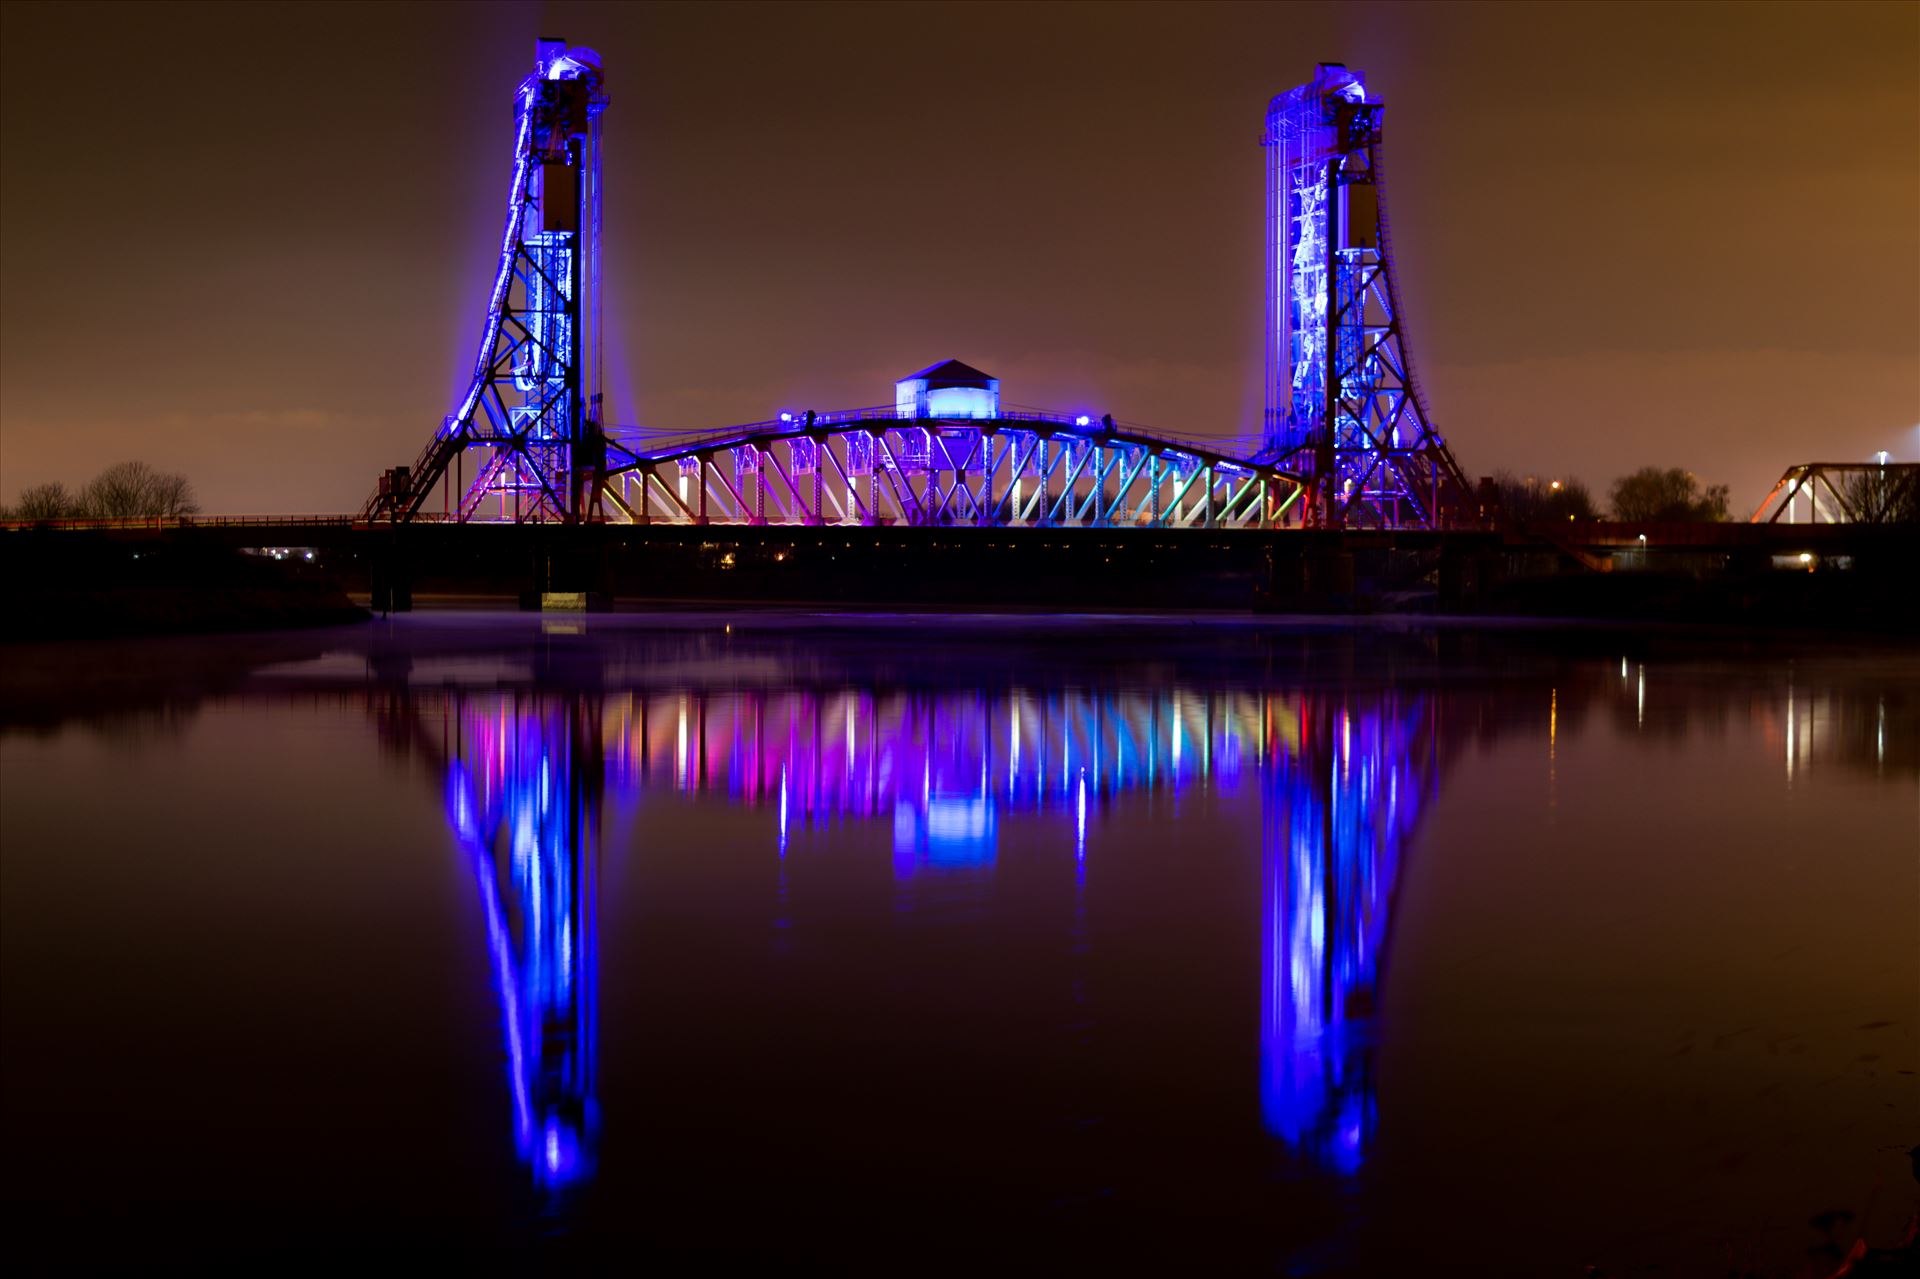 Newport Bridge Rainbow Lights Reflection - Taken boxing night down by the river Tees, Newport bridge with the reflection looked amazing by AJ Stoves Photography